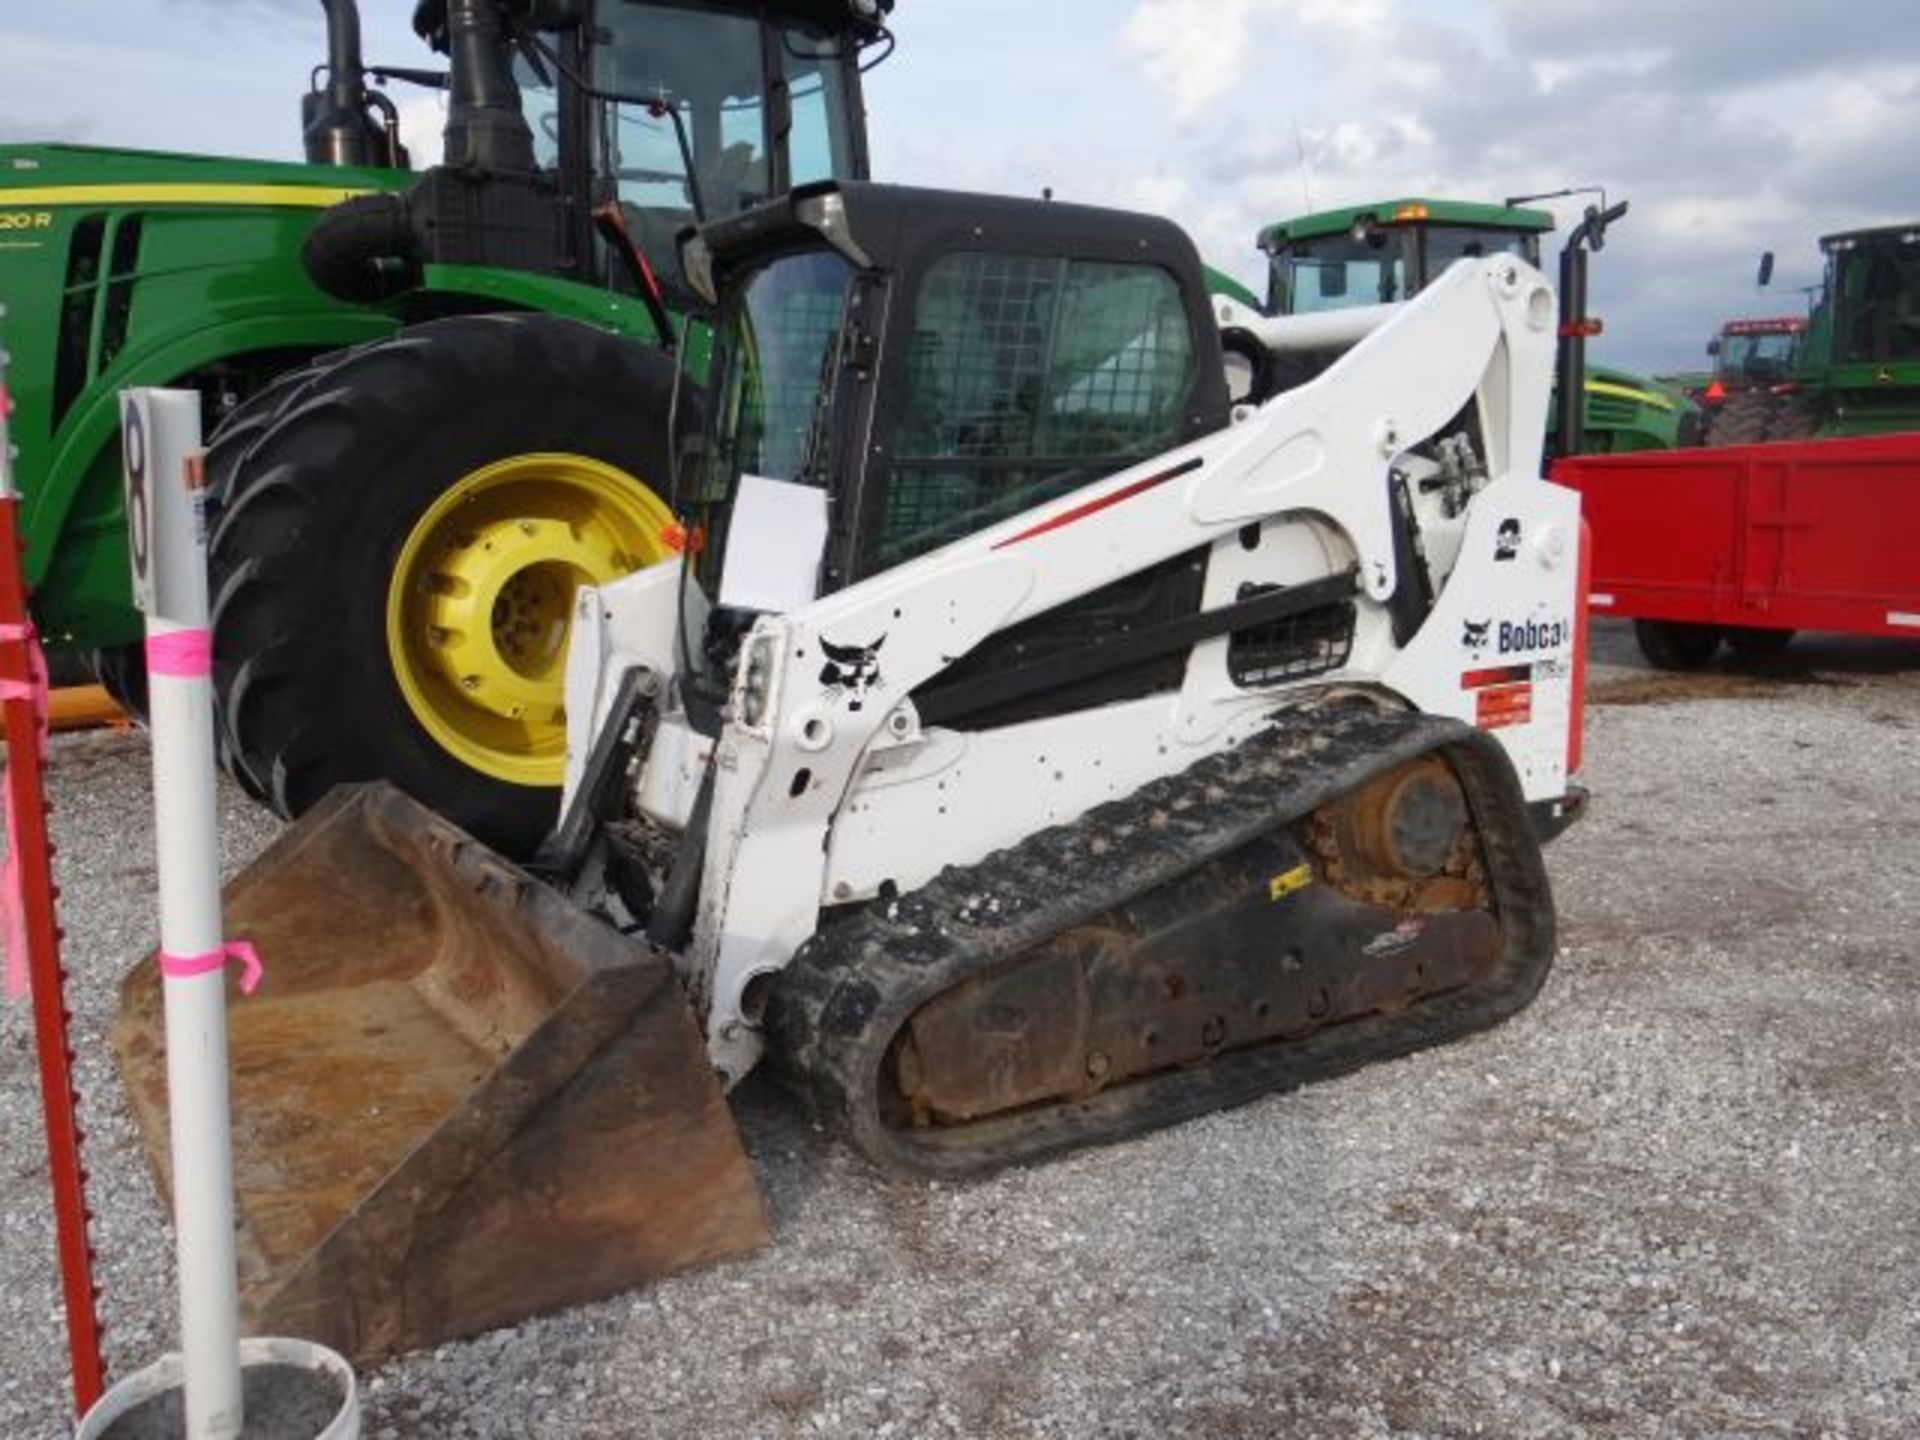 Bobcat T750, 2014 #158901, CTL, Cab w/ AC and Heat, Joystick Controls Switchable From ISO and H - Image 4 of 6